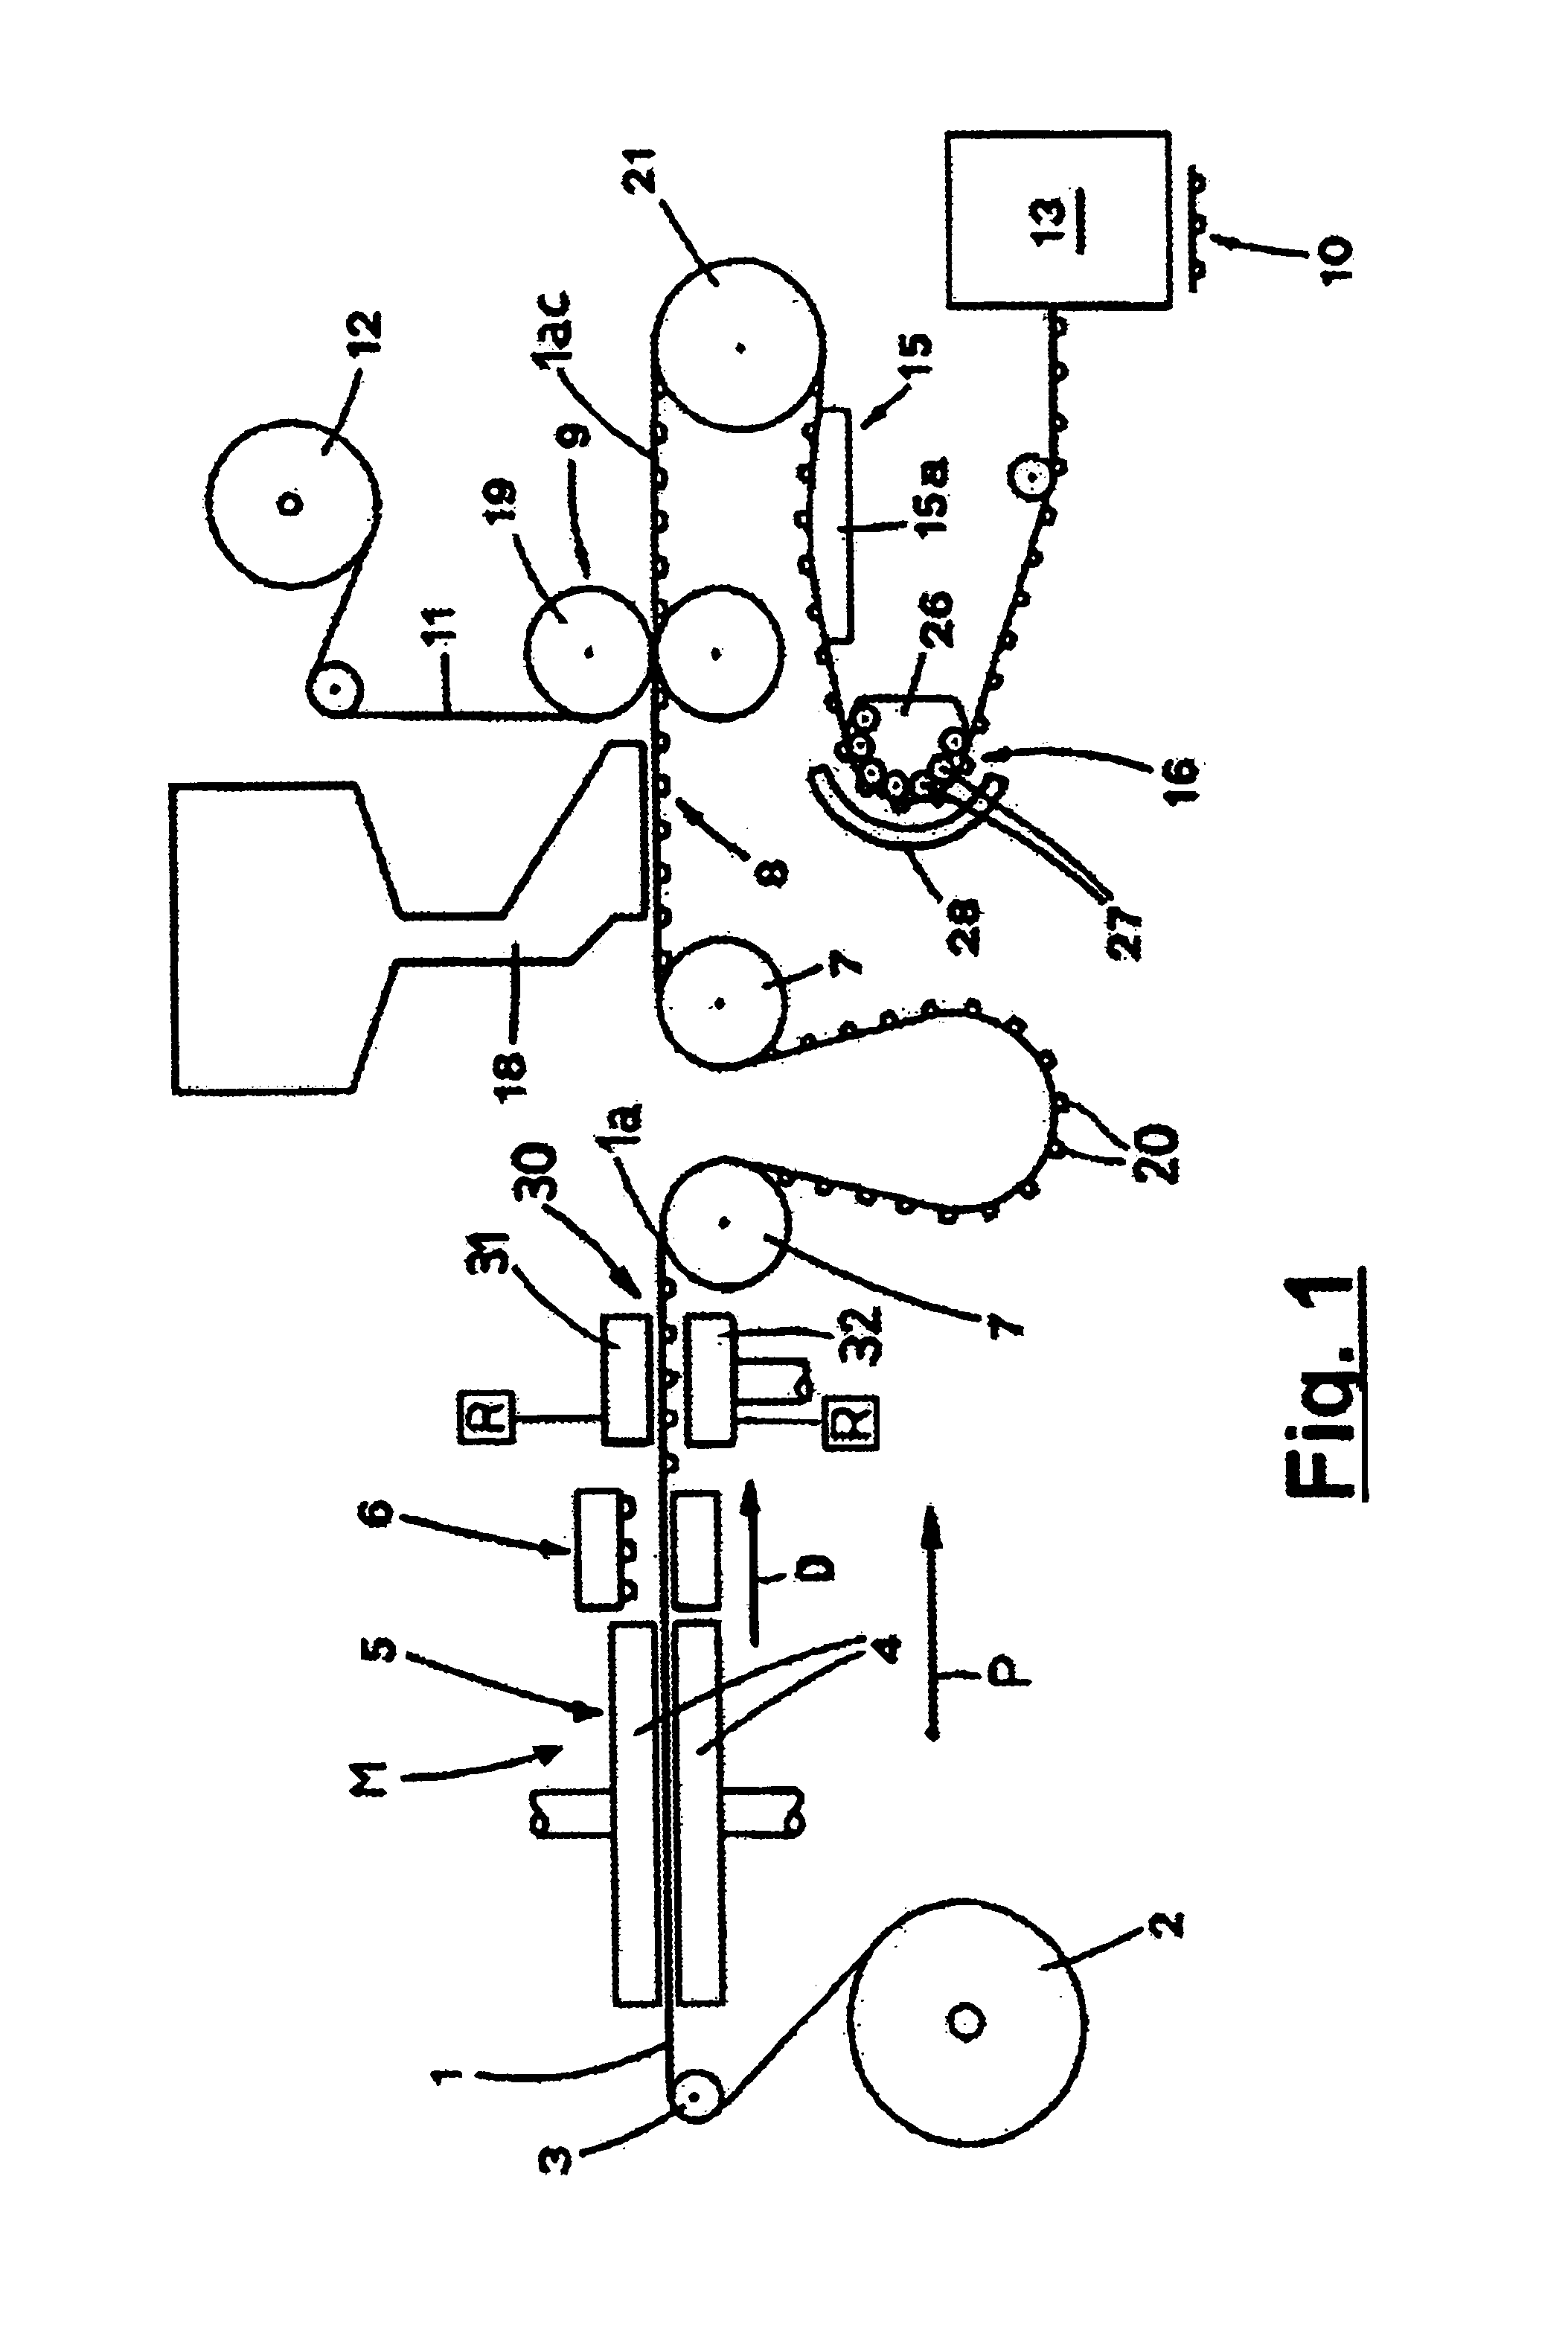 Method and machine for producing blister packs